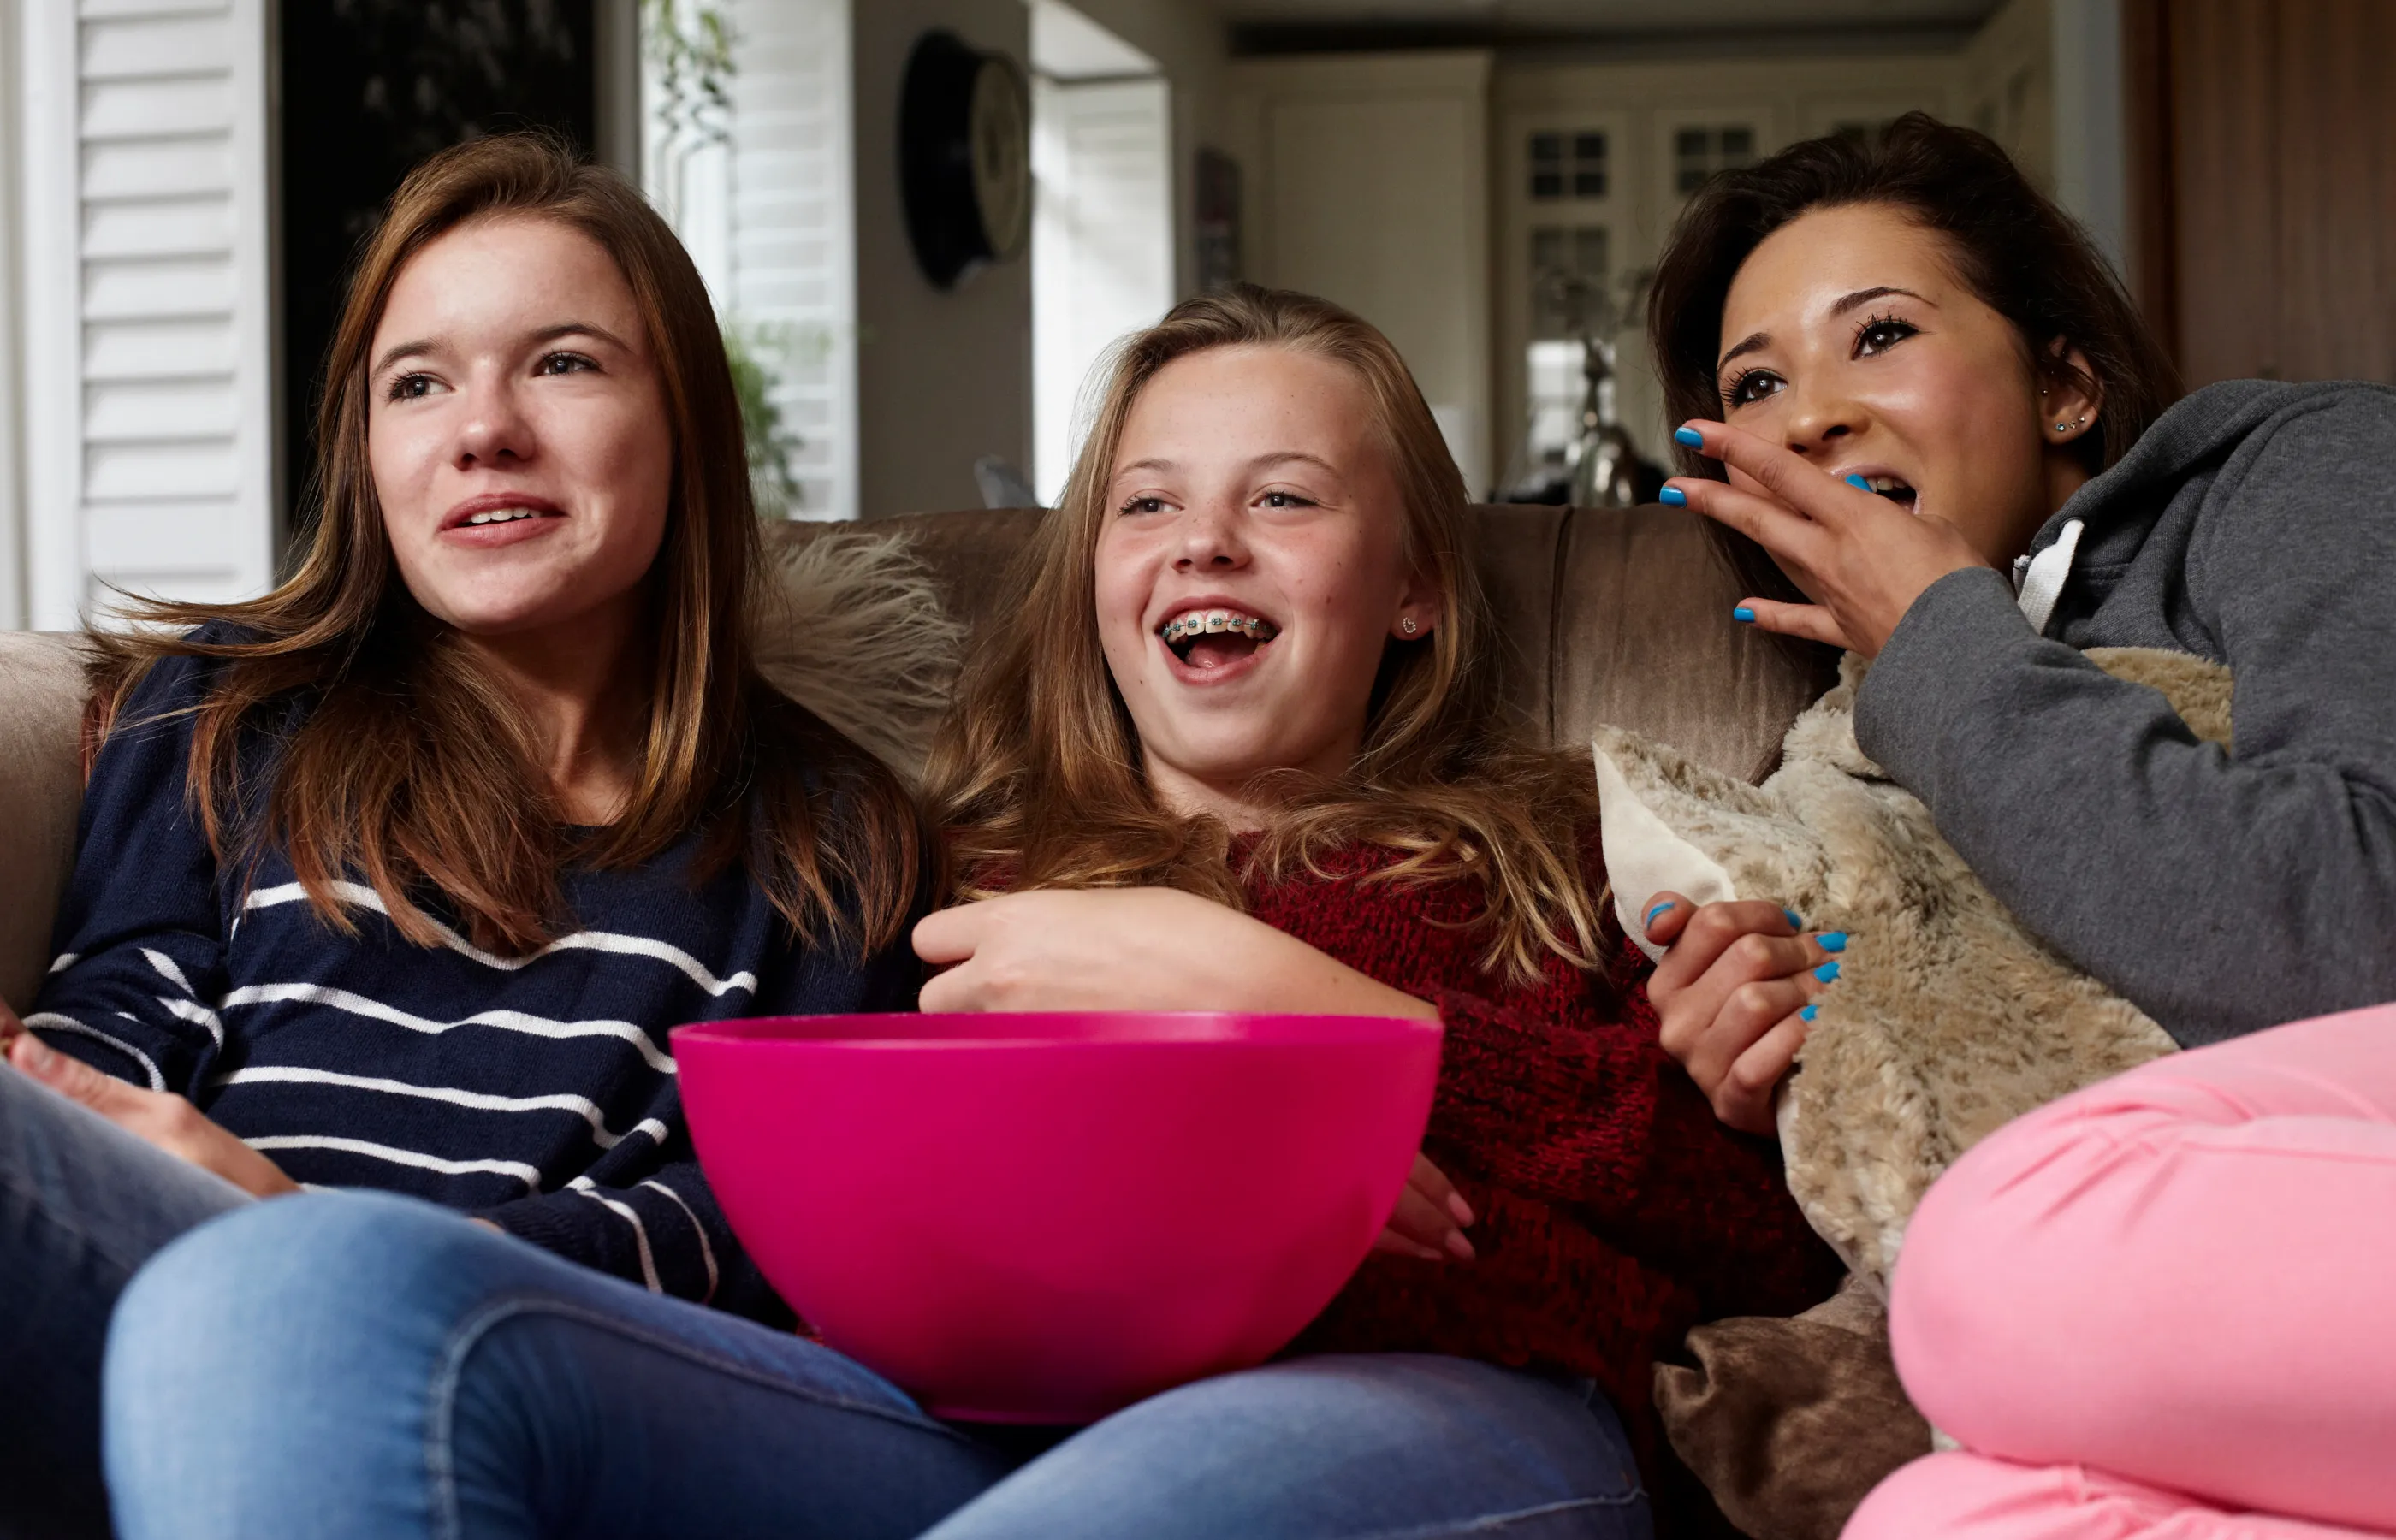 Three teenager girls are sitting on a couch eating popcorn as they watch television. 